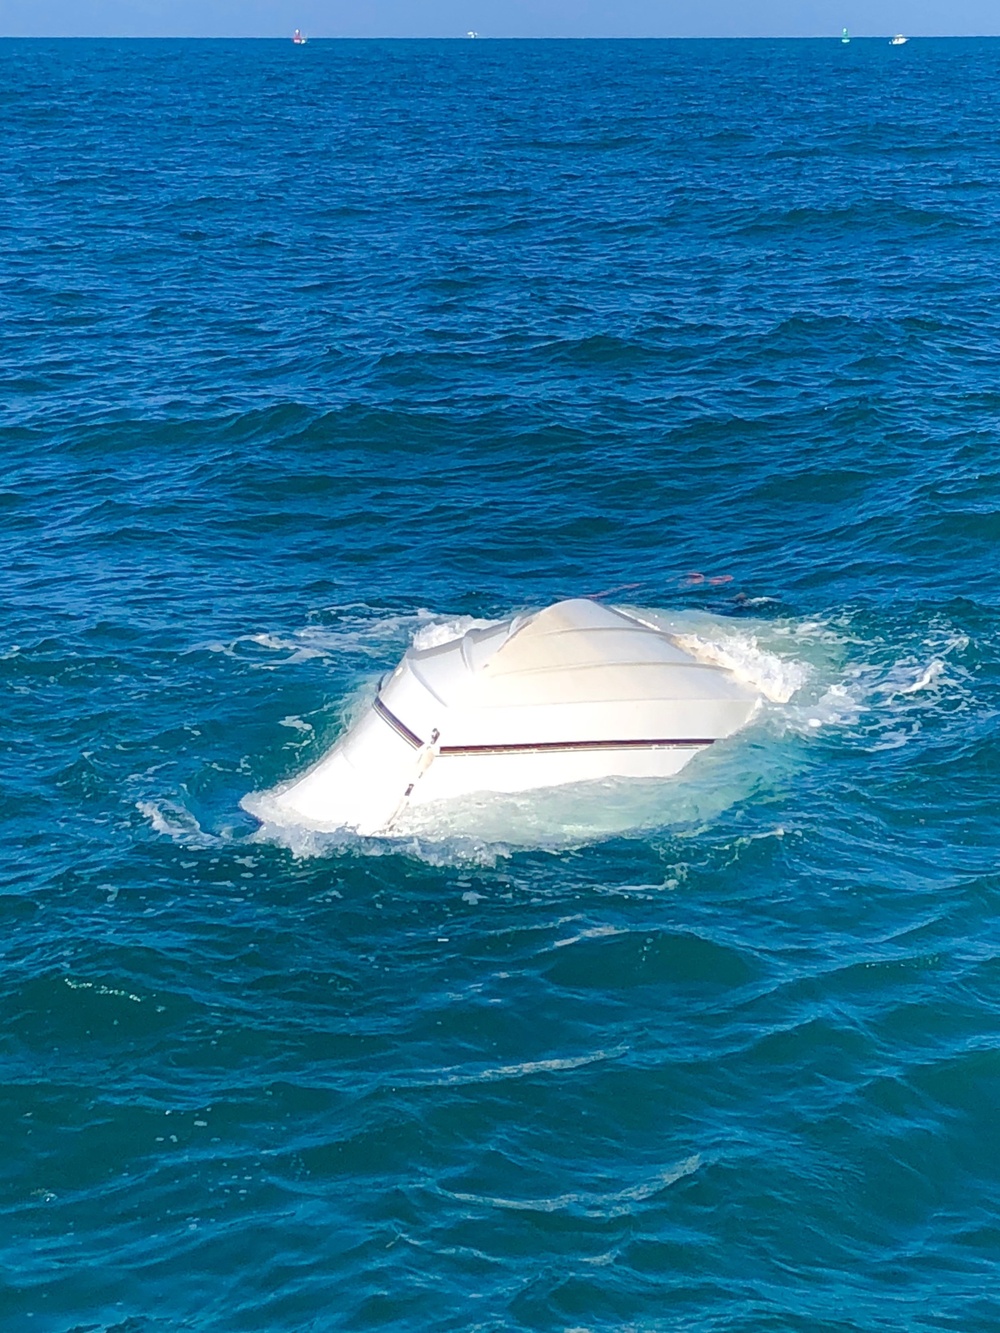 Coast Guard, good Samaritans rescue 3 boaters after vessel capsizes in Tampa Bay